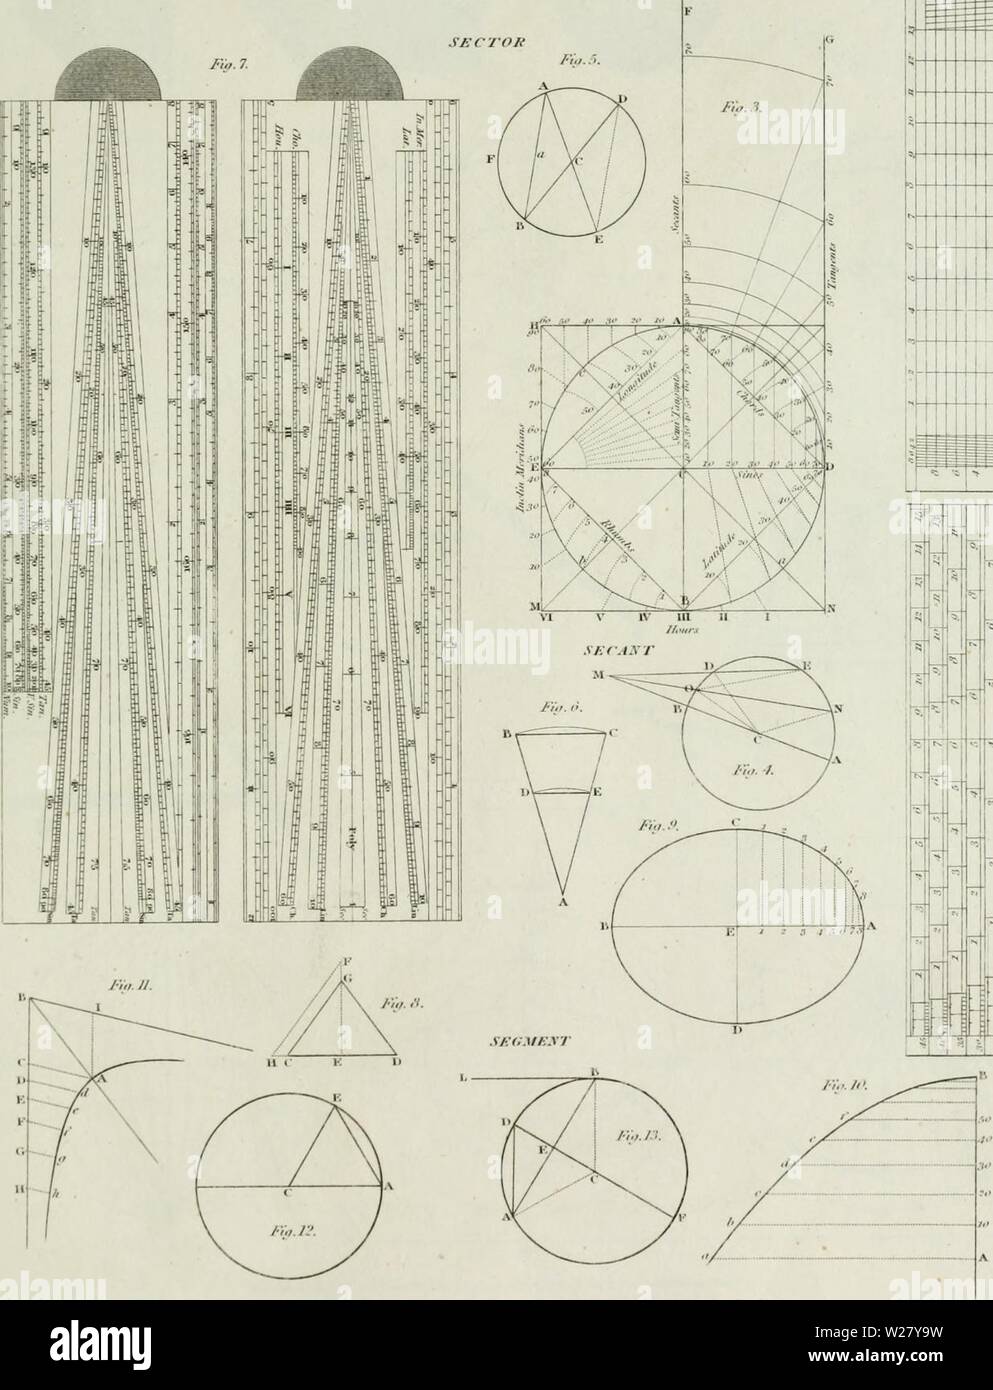 Archive image from page 328 of The cyclopaedia; or, Universal dictionary. The cyclopaedia; or, Universal dictionary of arts, sciences, and literature. Plates  cyclopaediaoru02rees Year: 1820  GEOMETRY. PLAT:sjm. SCALE Fia.l. j-;;. 2 3 ''1 â 'i '1  o O JO n 2Z i3 - Â« â Â«1 '7     ij | L   C( UJ , 1 Â« .,  H+-p tâ' Â« Y , l-H wj J 1  Ikp 1 t  â  -&gt;  L3i Â«i fuhli'.heii:&gt;.i rhr iht JiifrU. iSi.hu LoiuiHumJiiirjtJii-jOrm V JU.'tvv.PftMrw.th-r R.'w. /.Â»///.'//. '/.ow/y ,t,-ulf Stock Photo